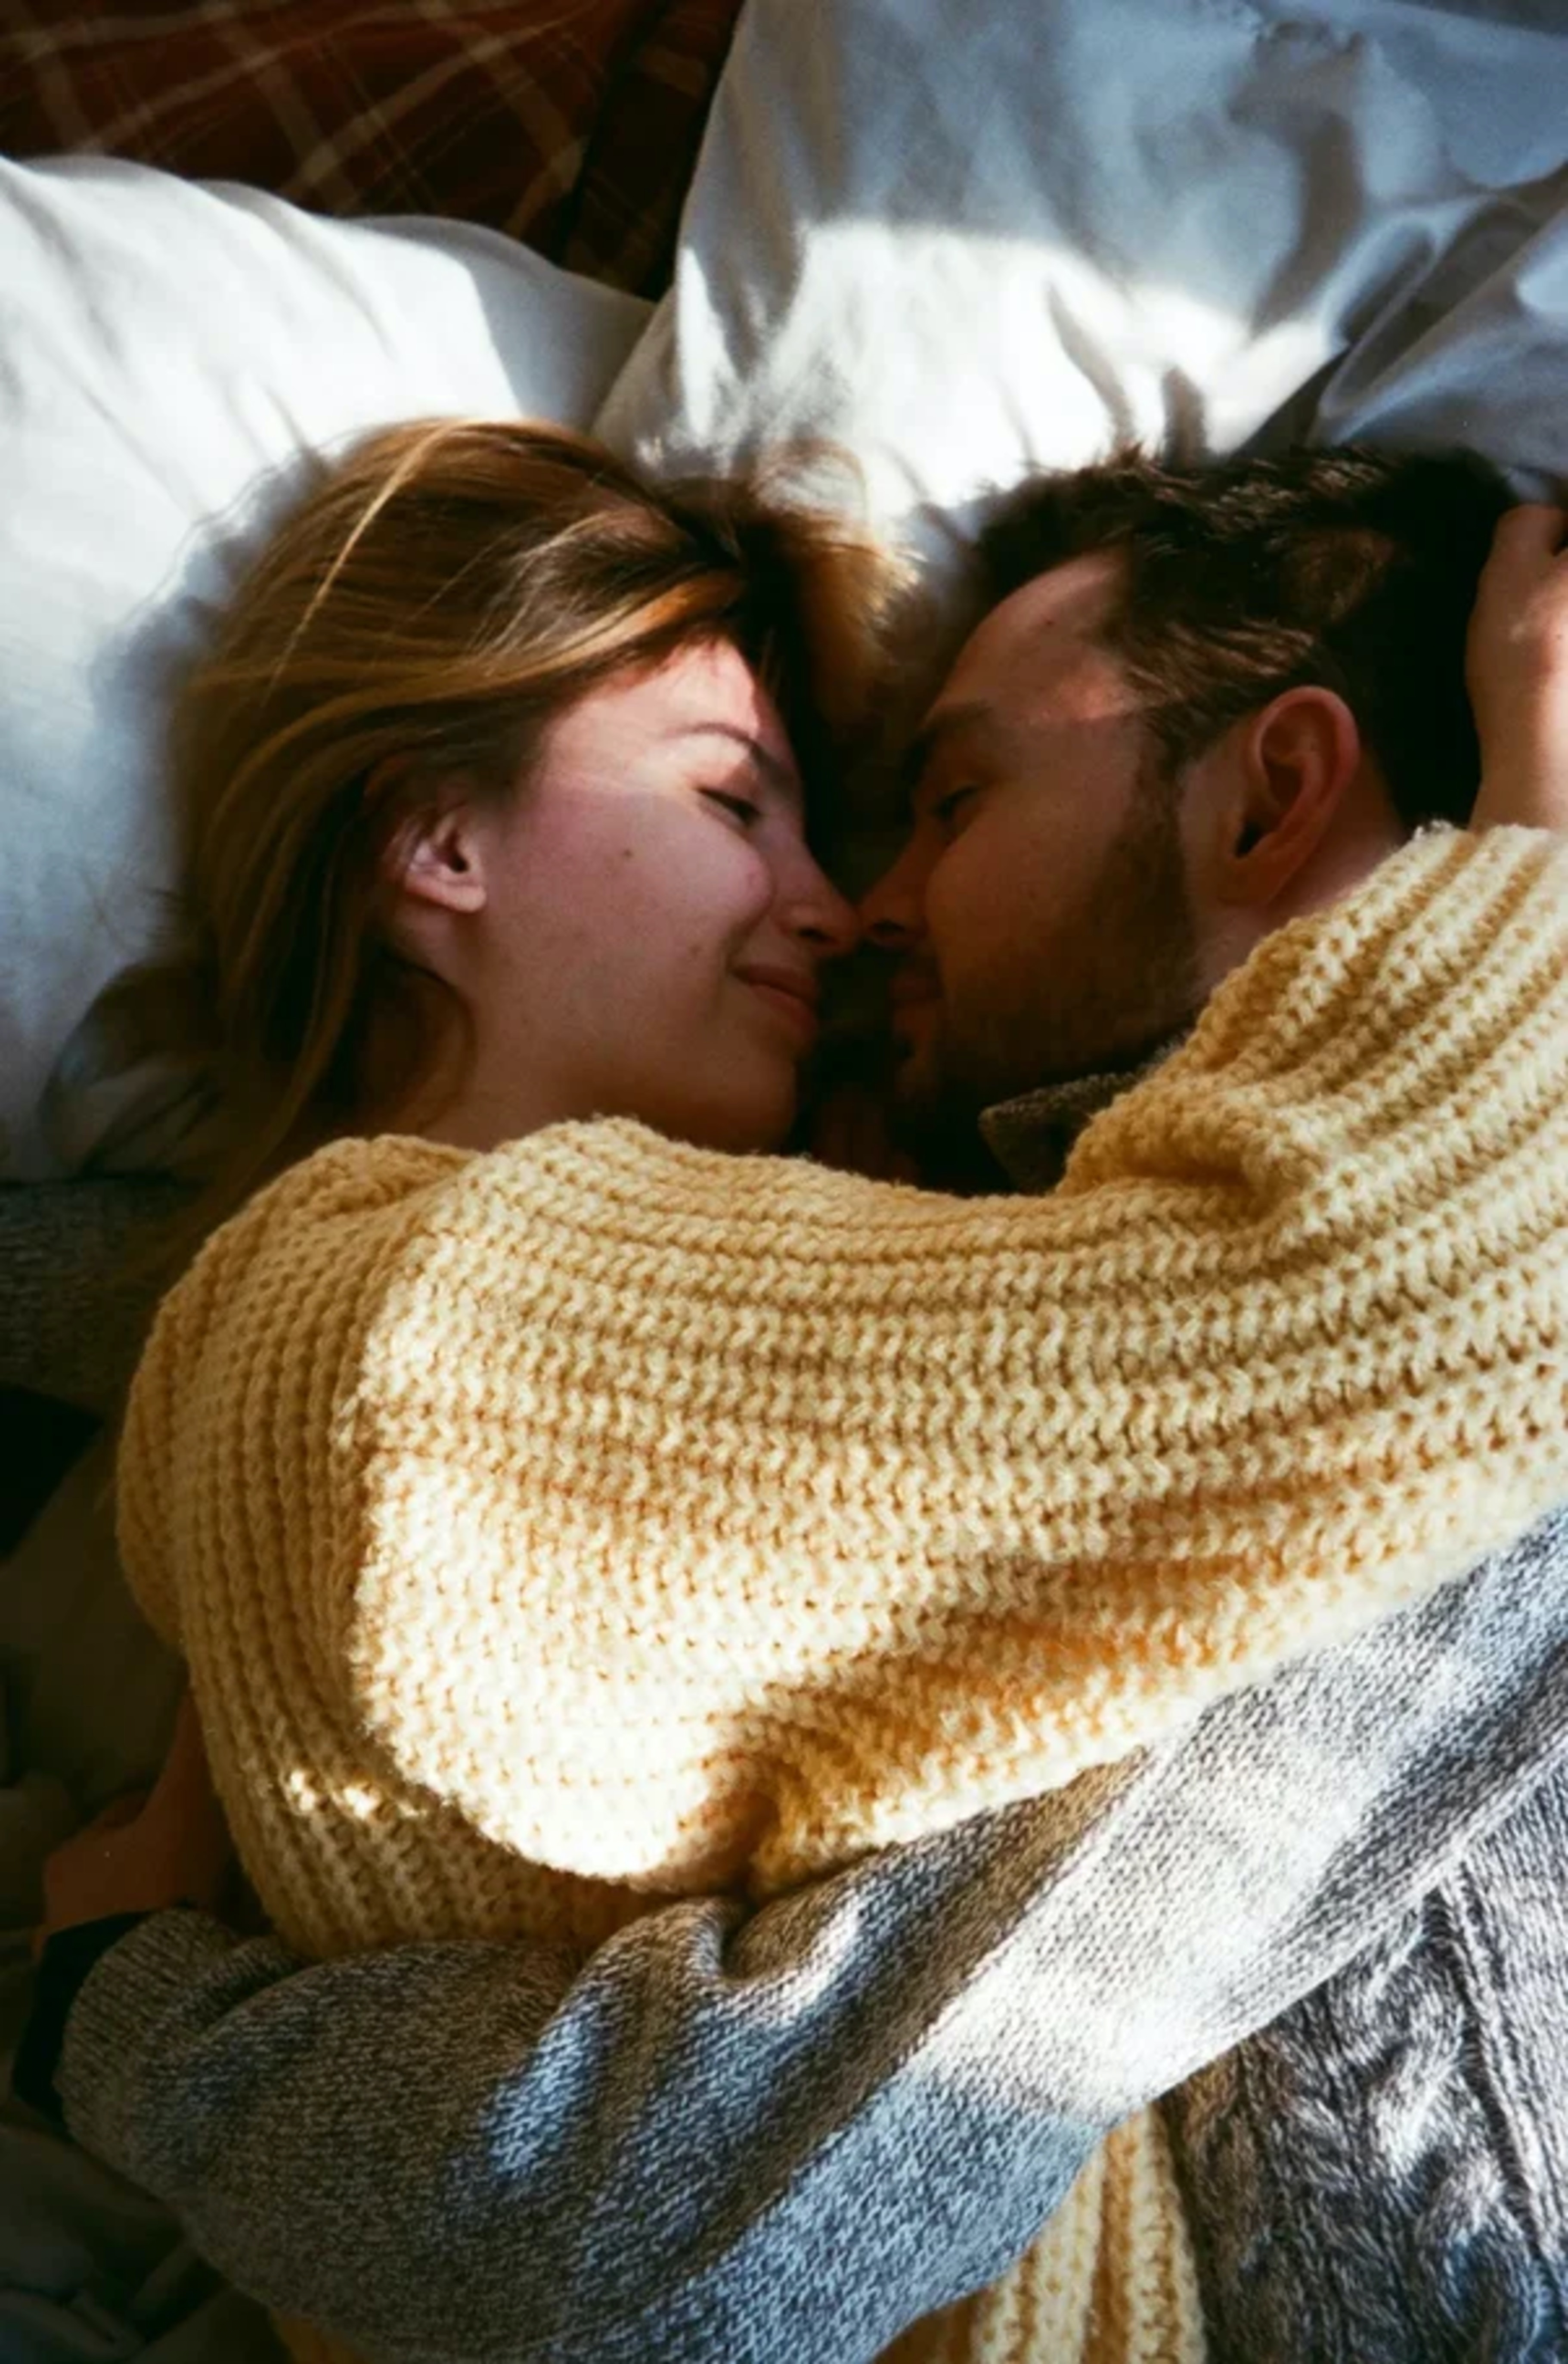 A couple lying in bed together. | Source: Pexels